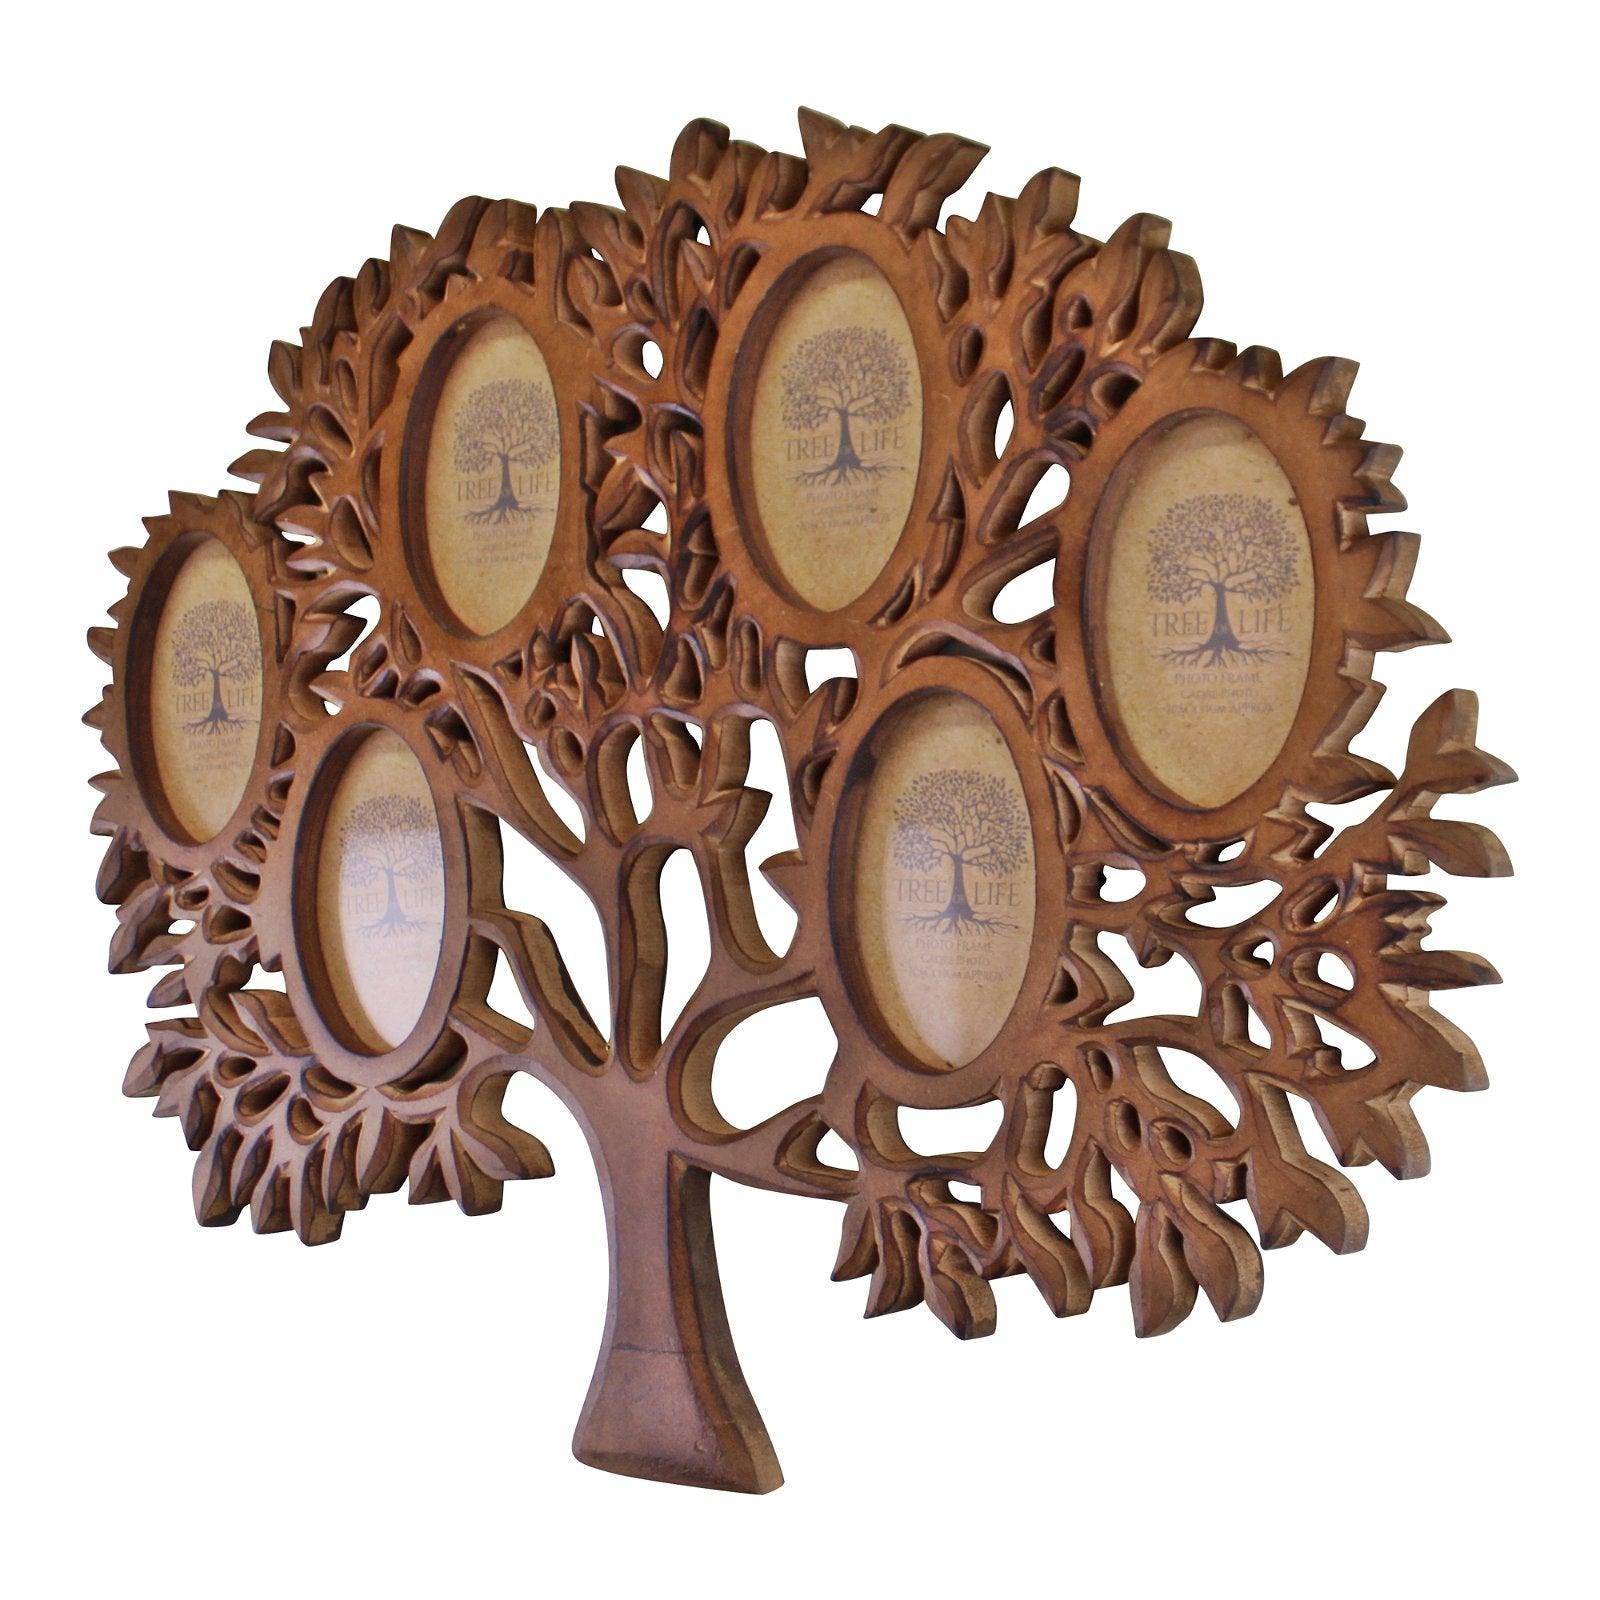 View Wooden Multi Photo Frame Tree Of Life Design information